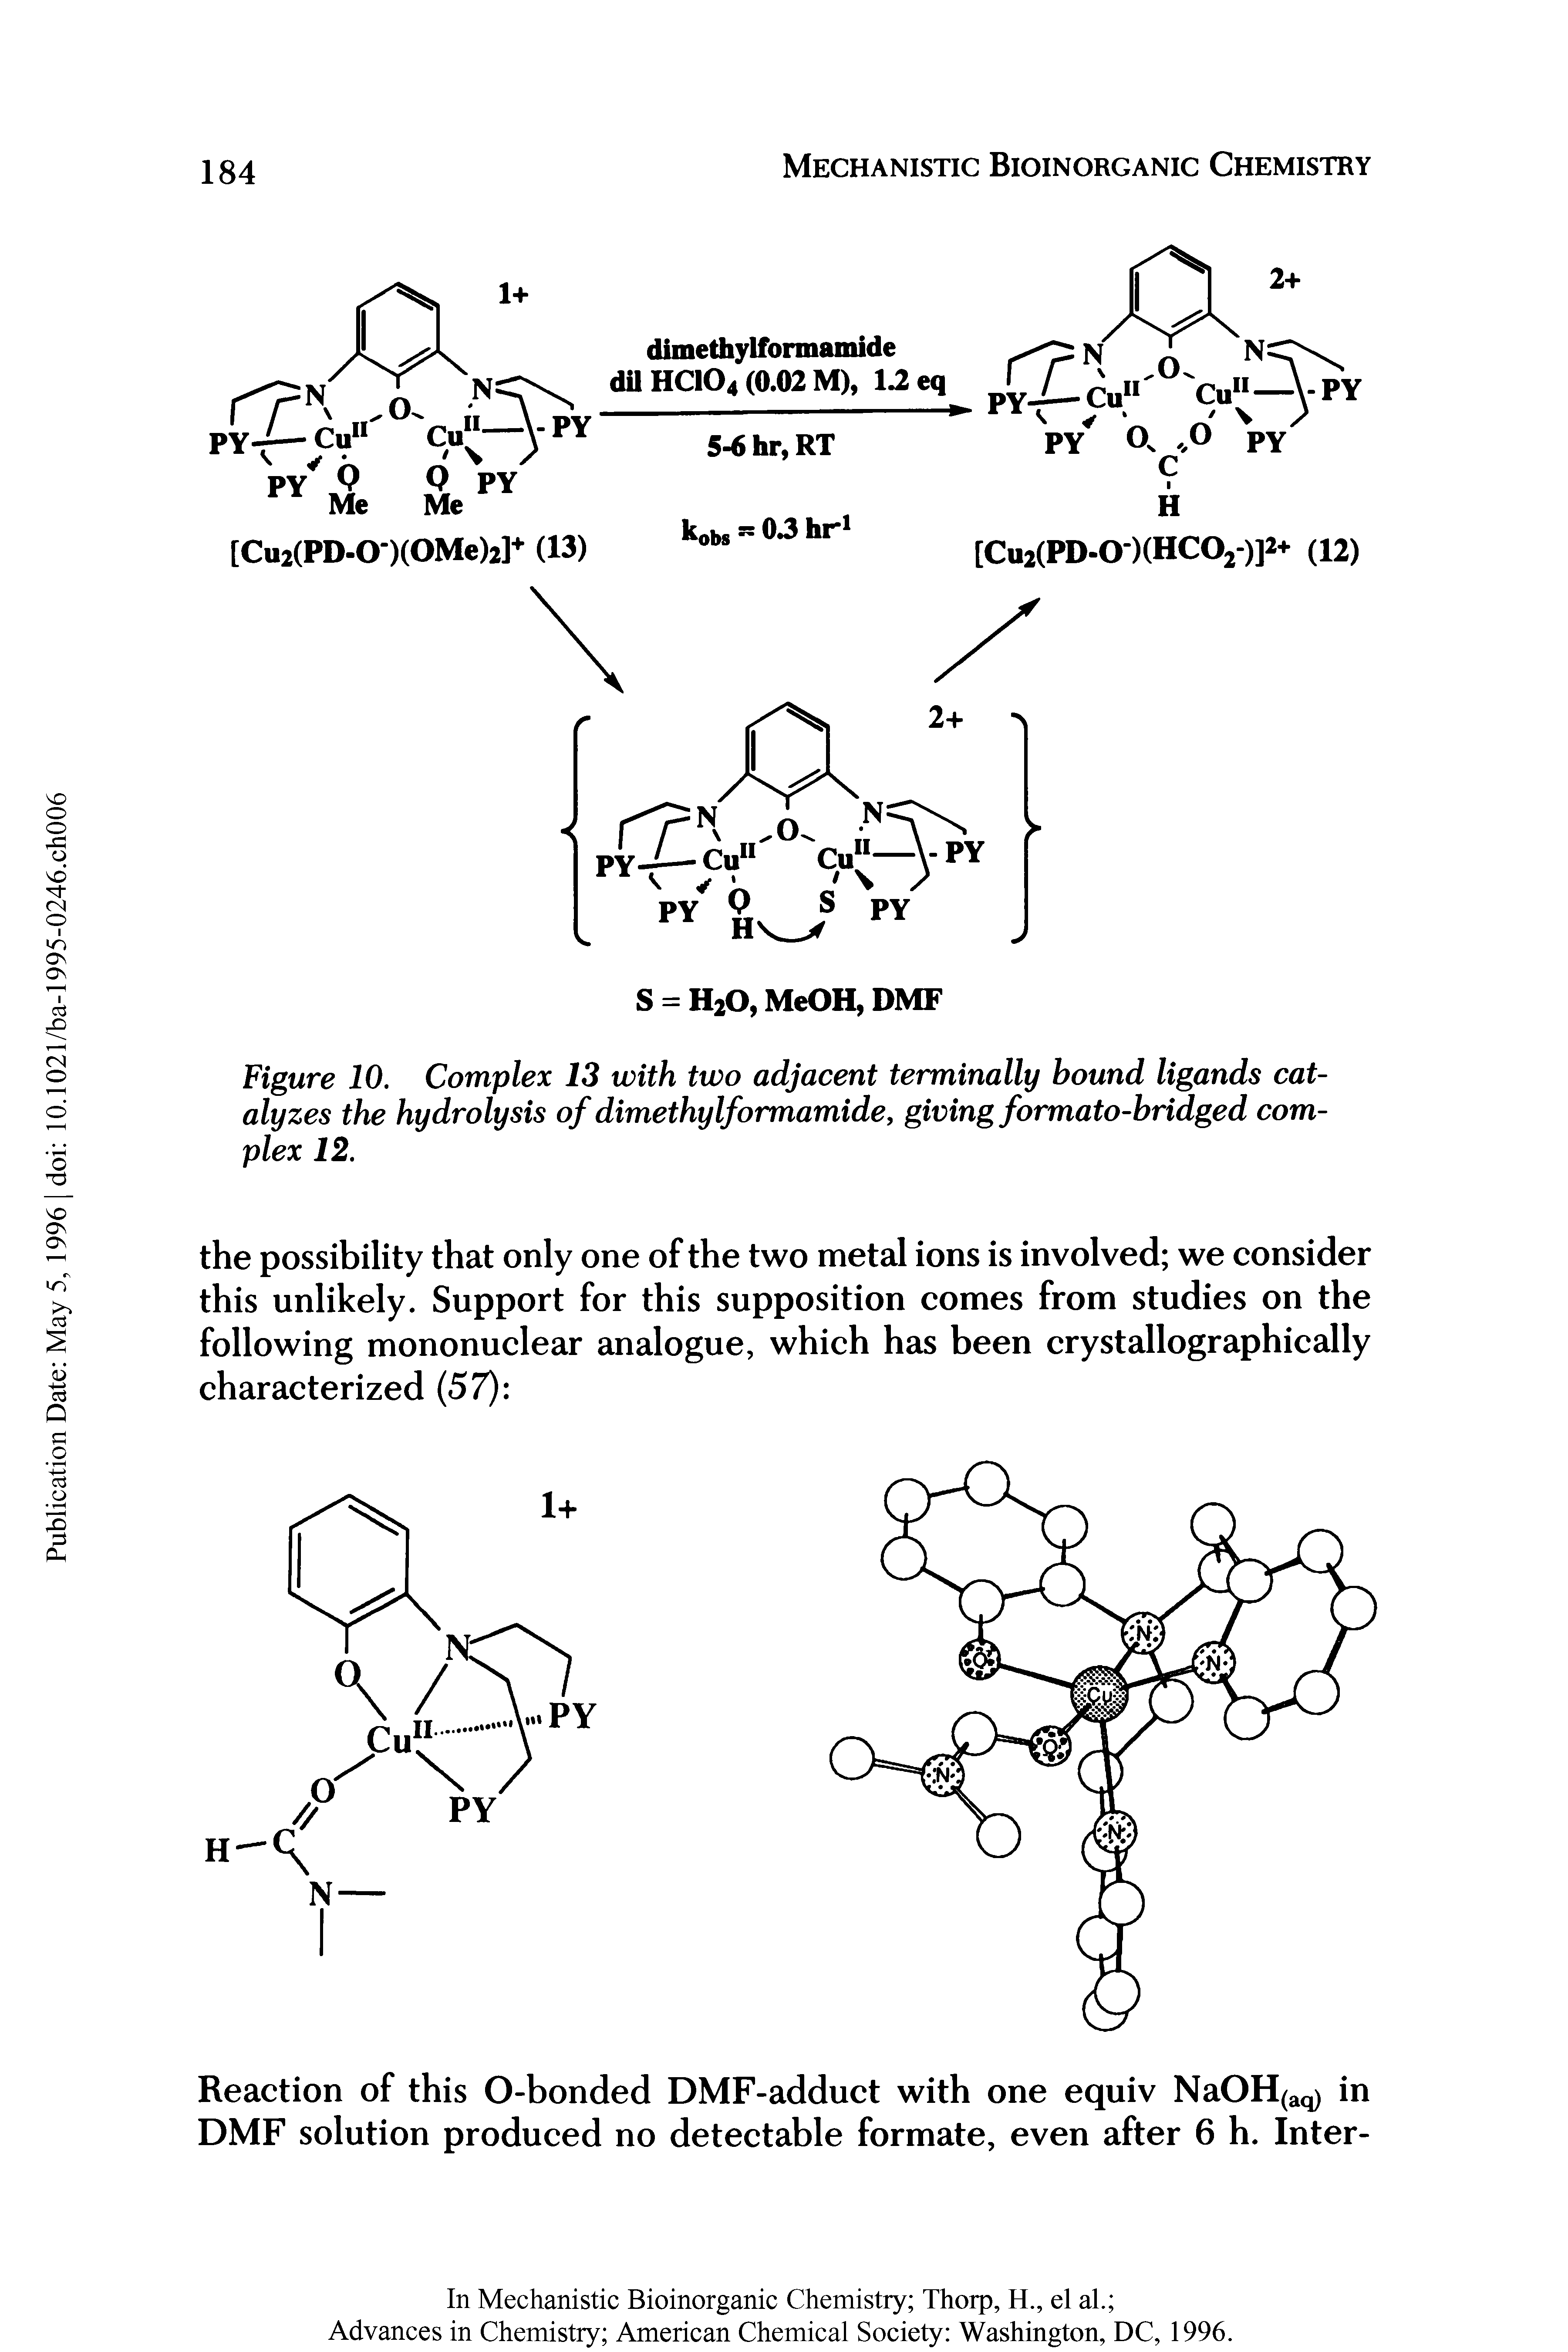 Figure 10. Complex 13 with two adjacent terminally bound ligands catalyzes the hydrolysis of dimethylformamide, giving formato-bridged complex 12.